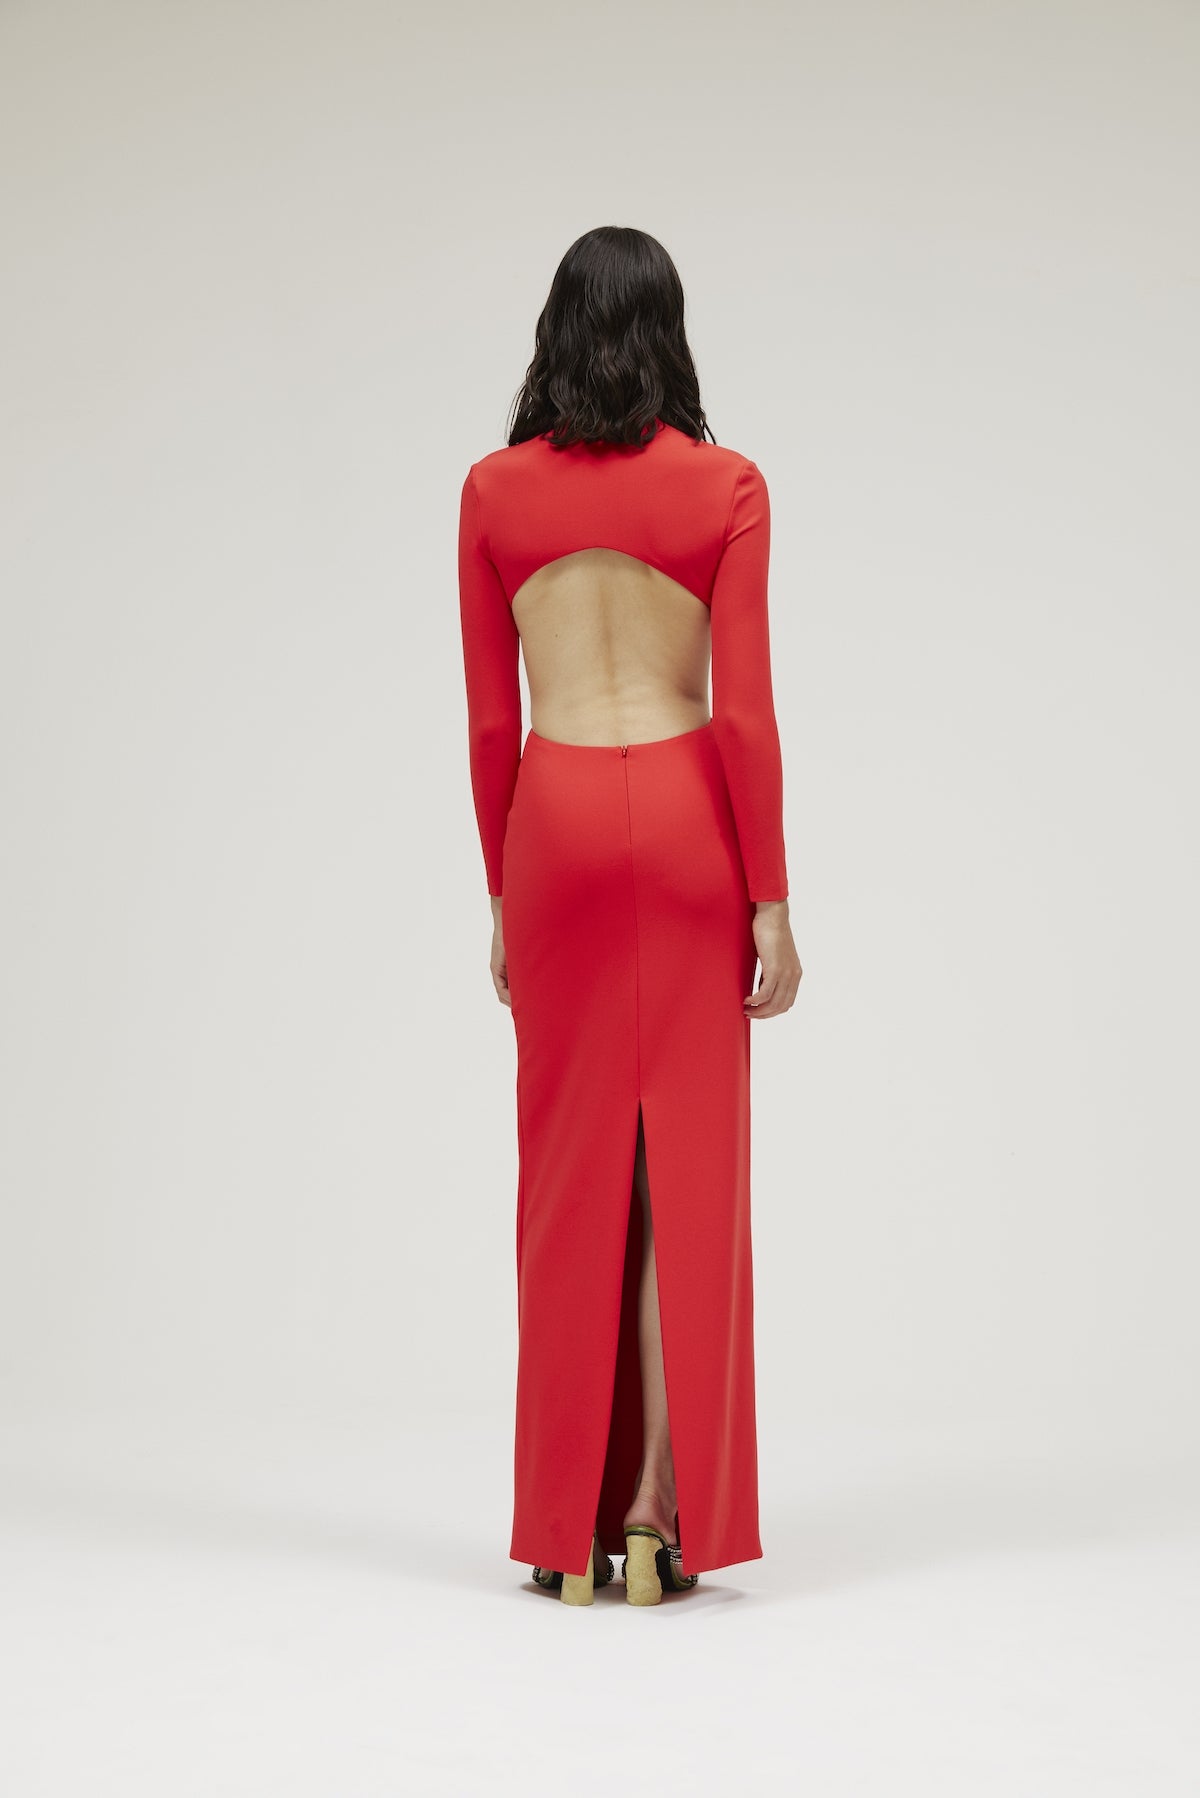 The Bougie Dress in True Red